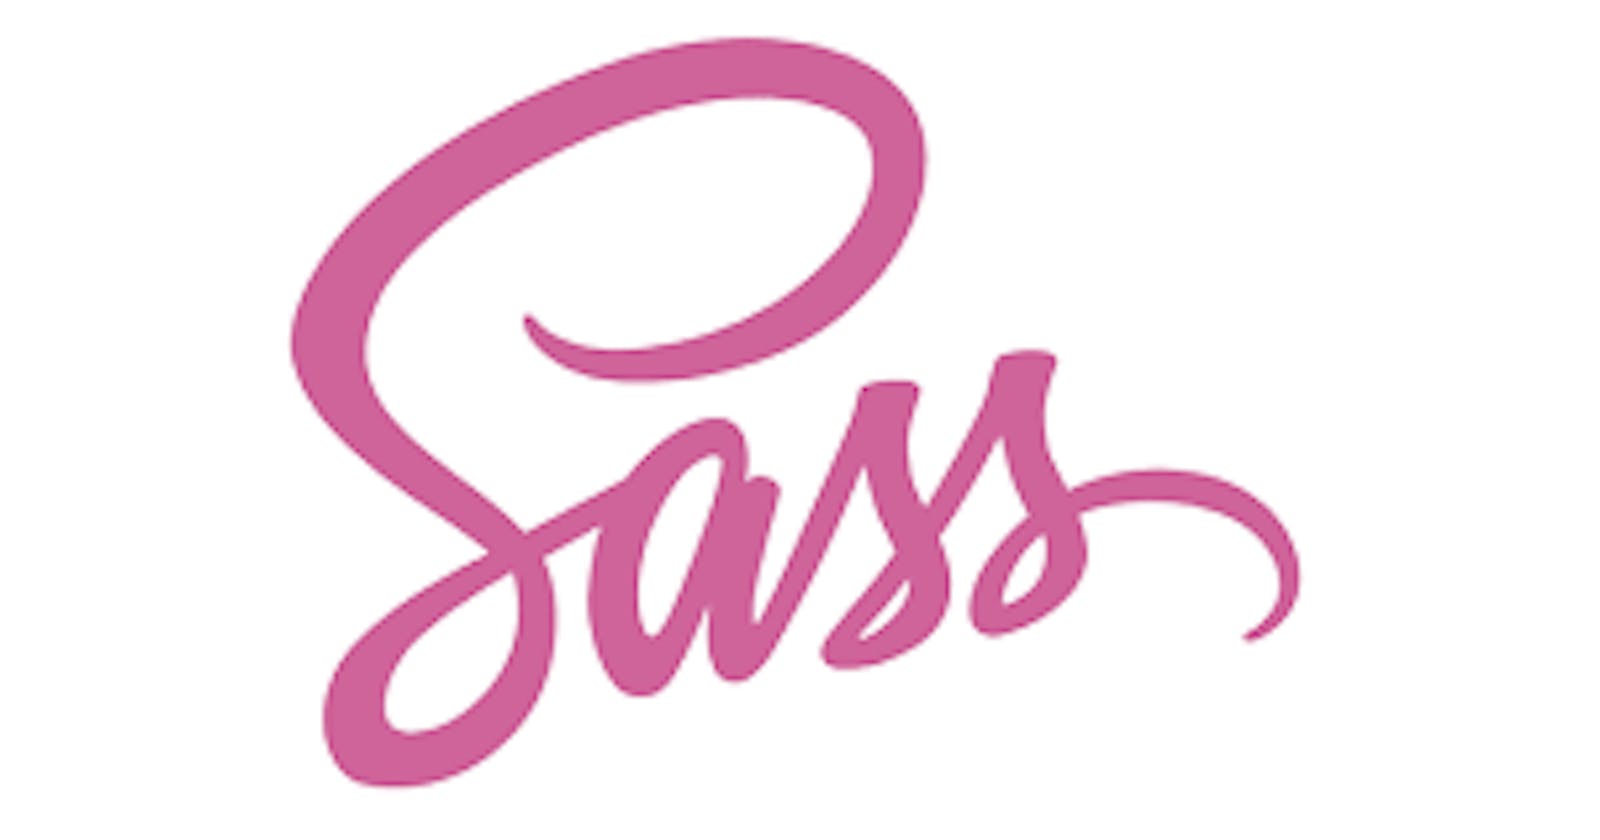 Let’s talk Sass and why you should use it for your Stylesheets